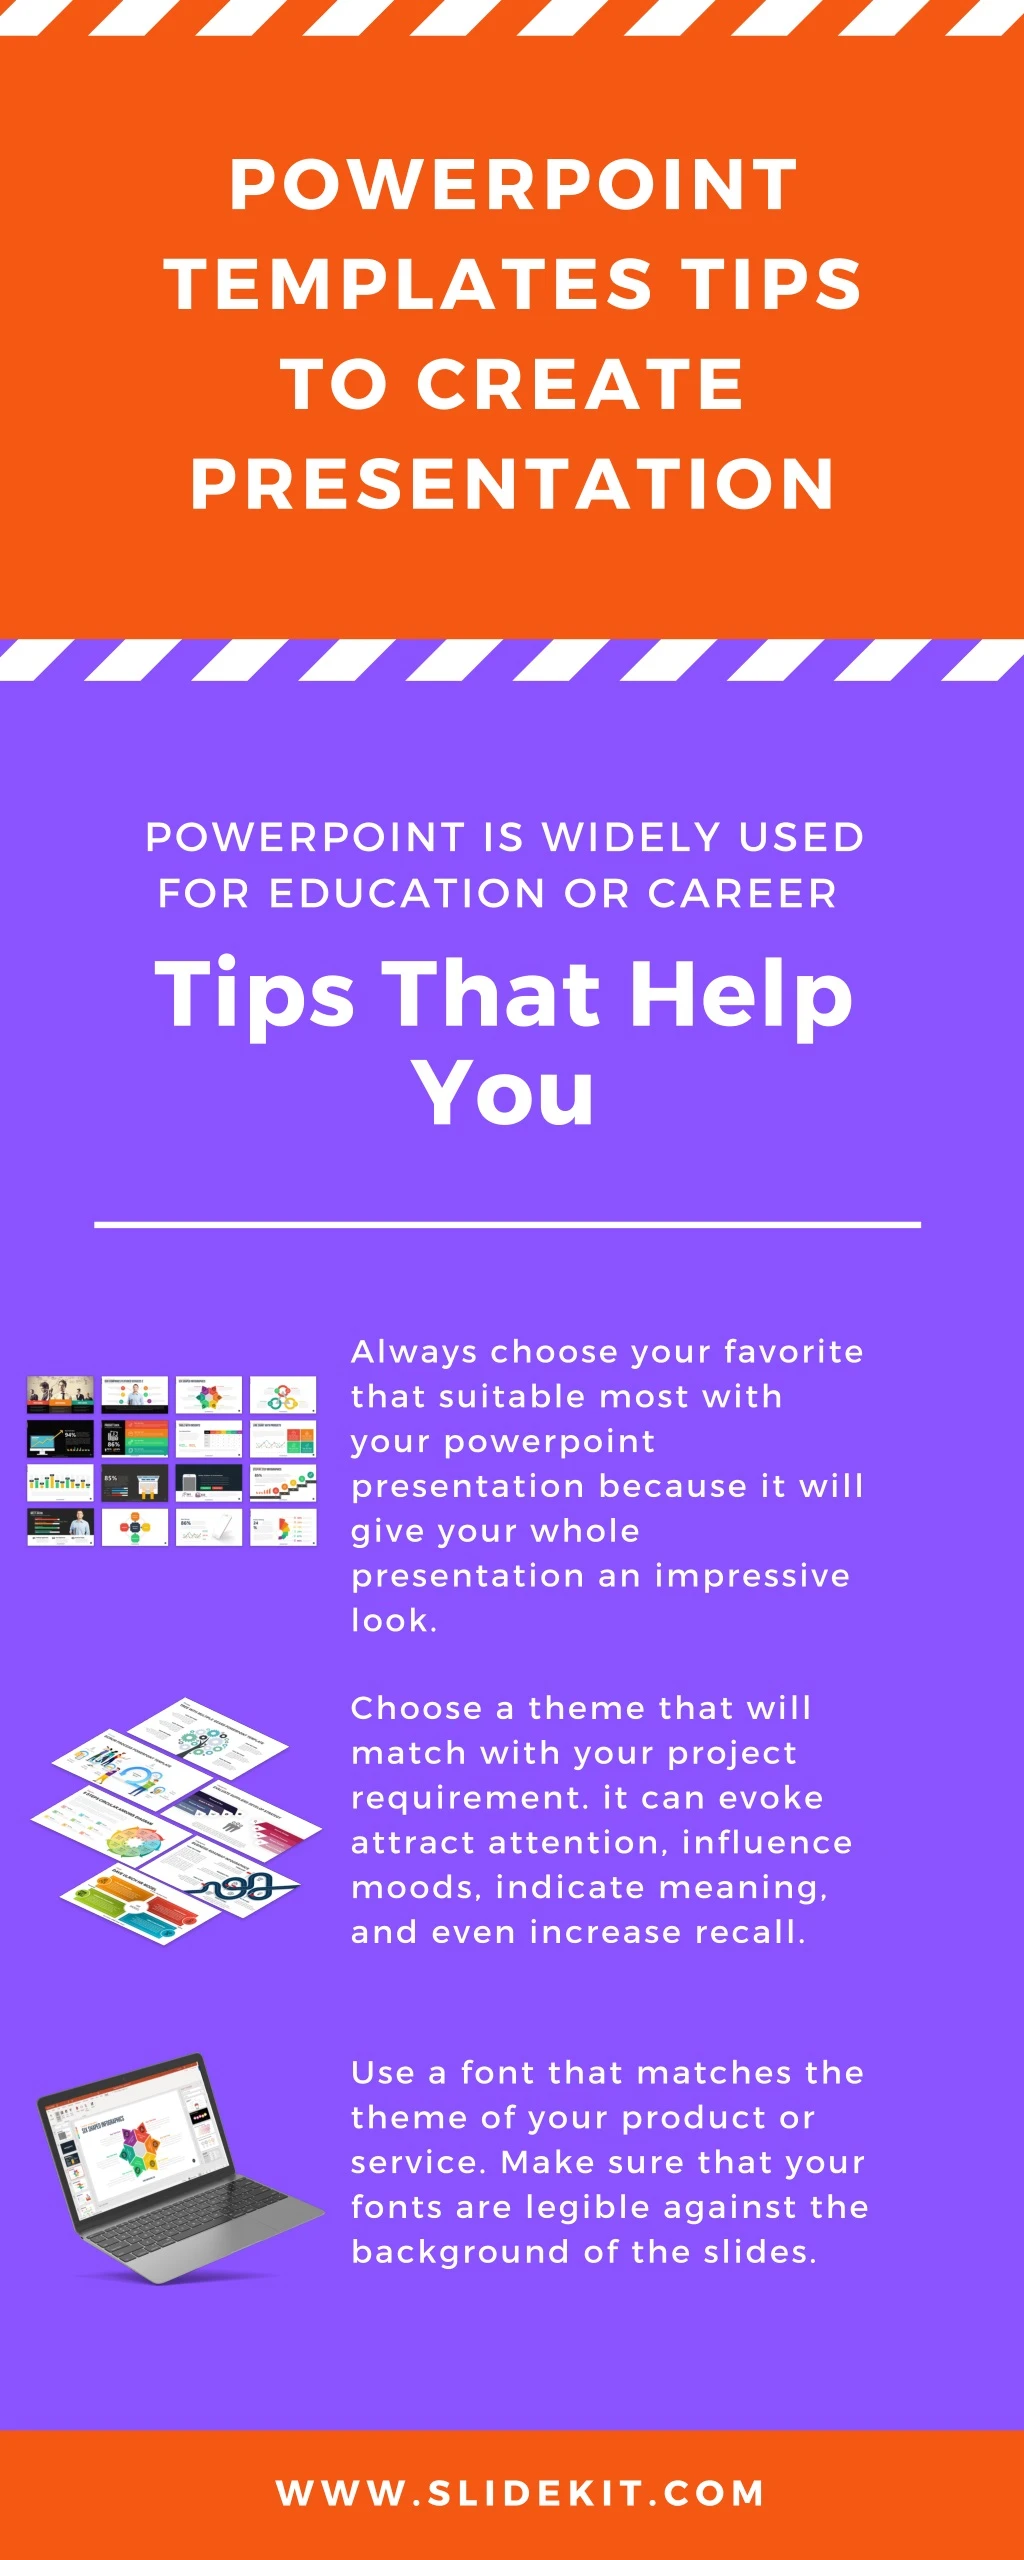 powerpoint templates tips to create presentation